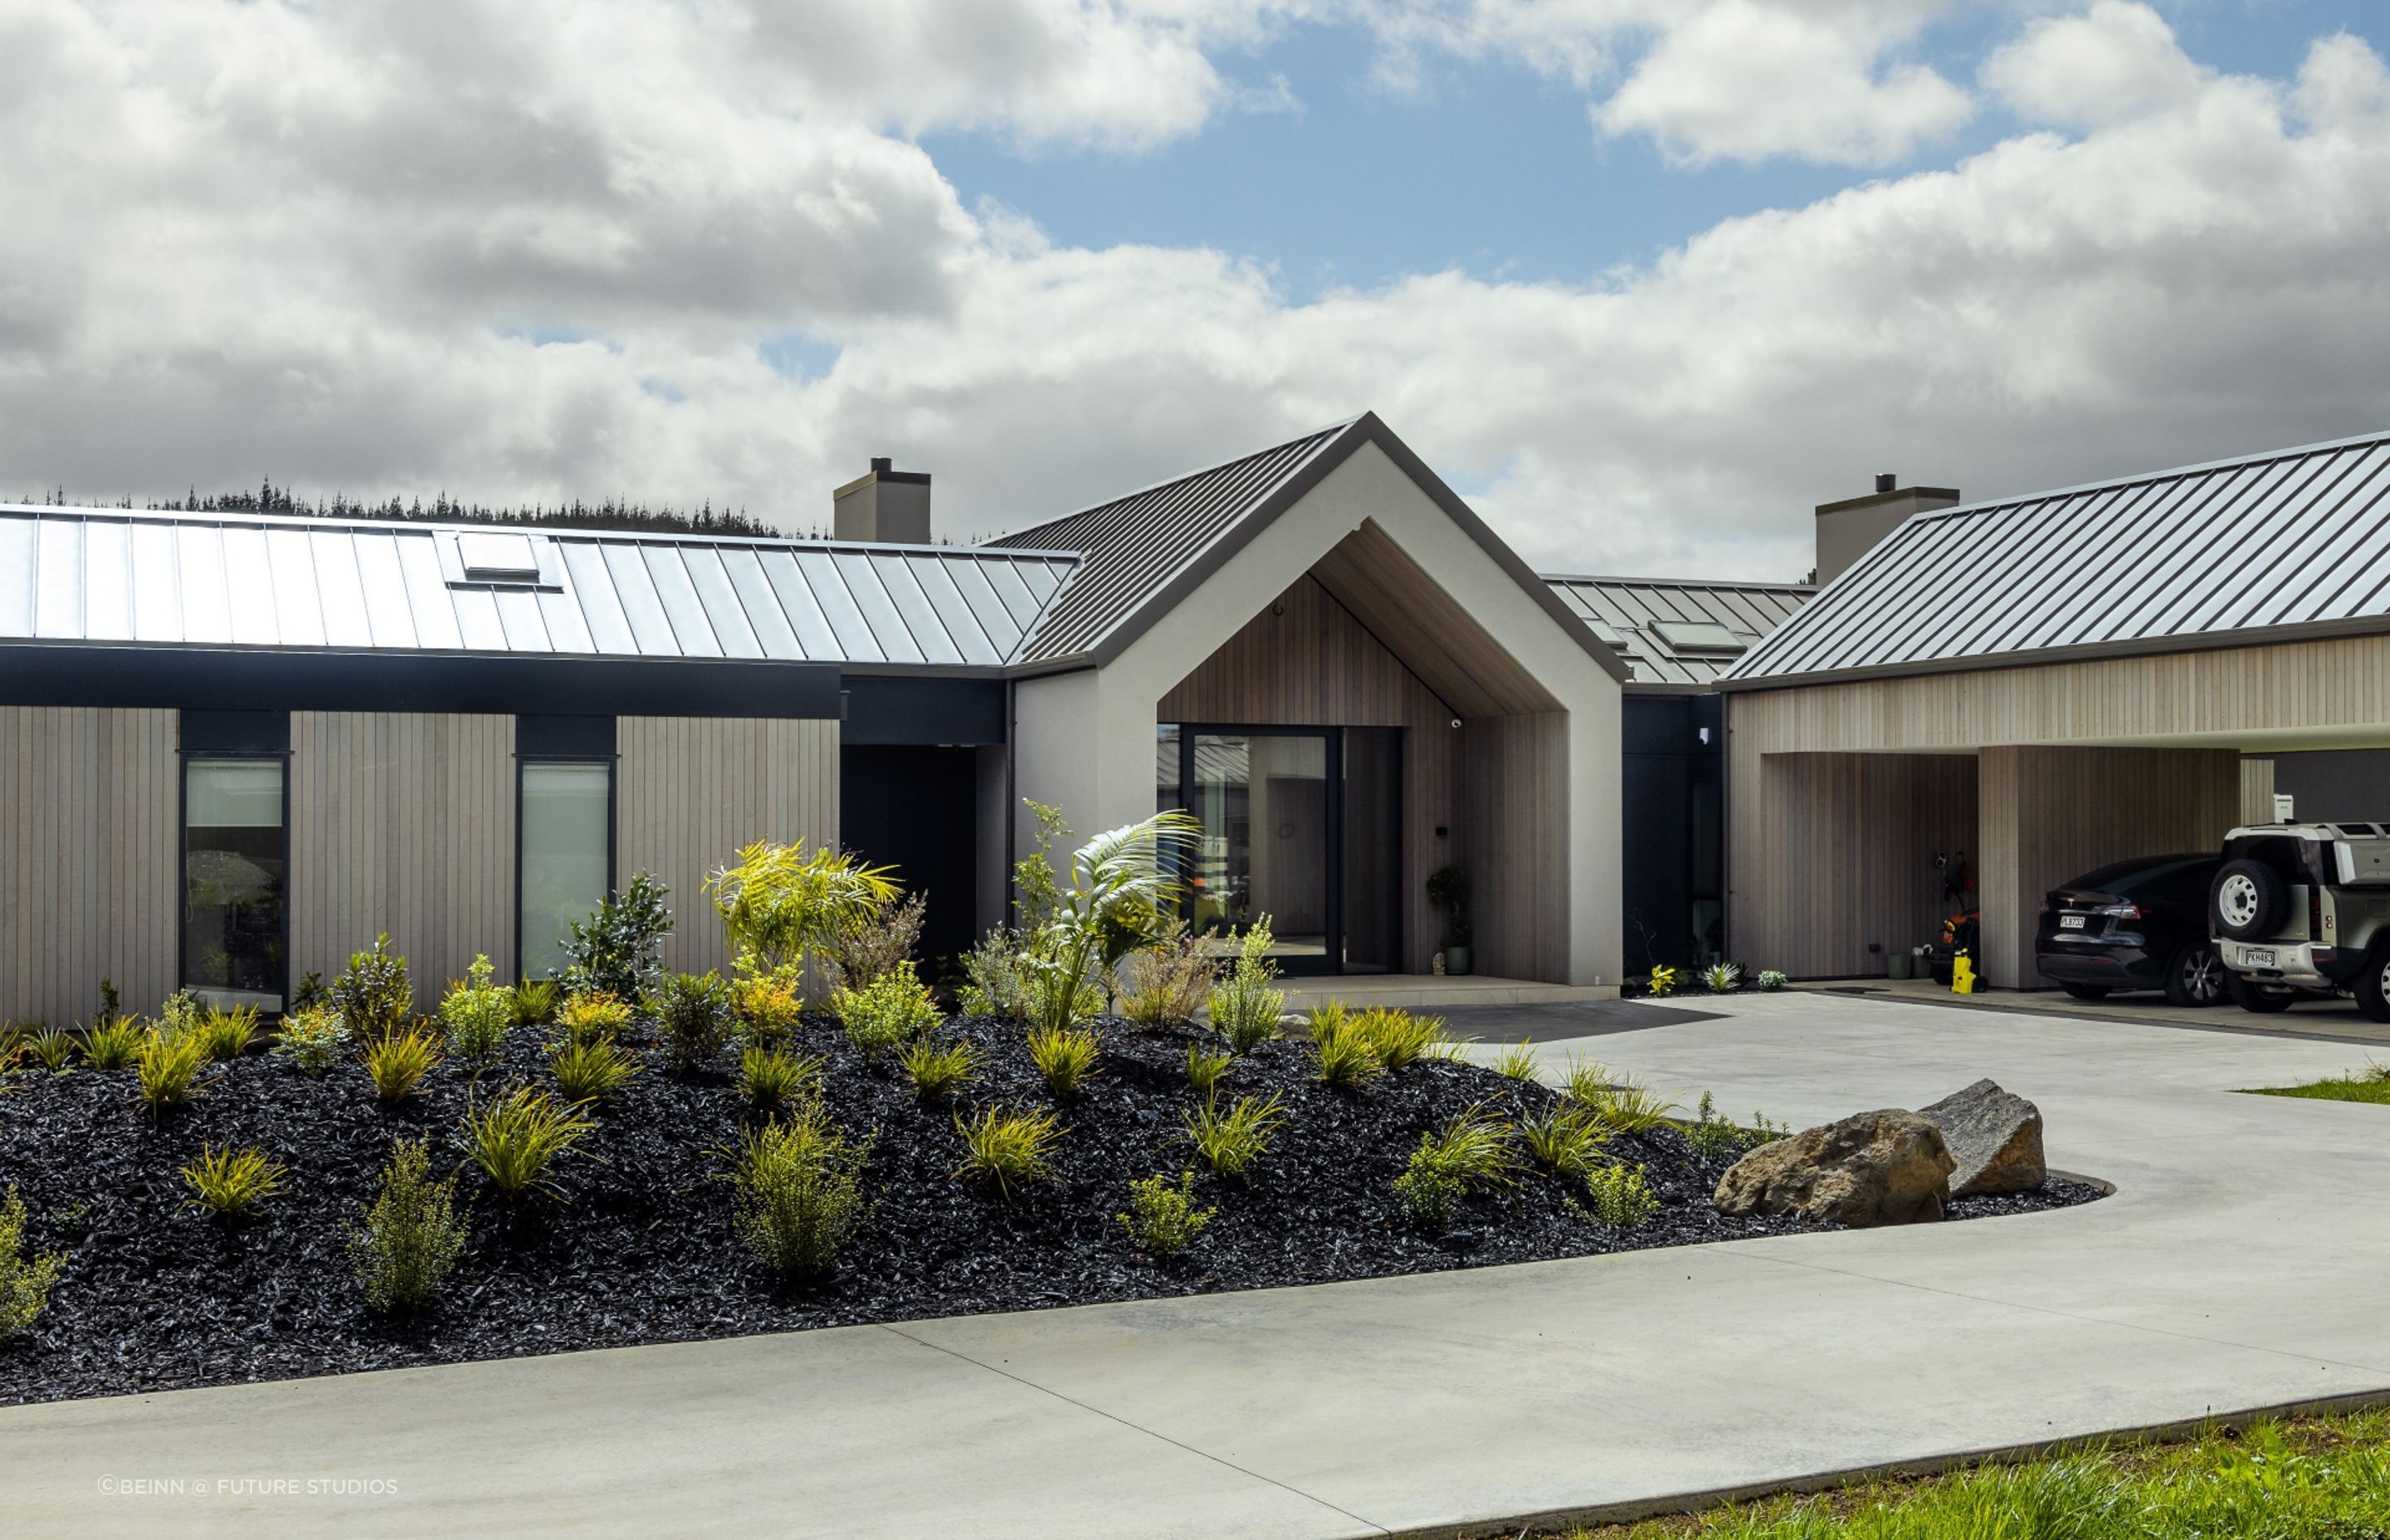 The entry to the homes is neatly recessed into a central gable form, creating a sheltered space.